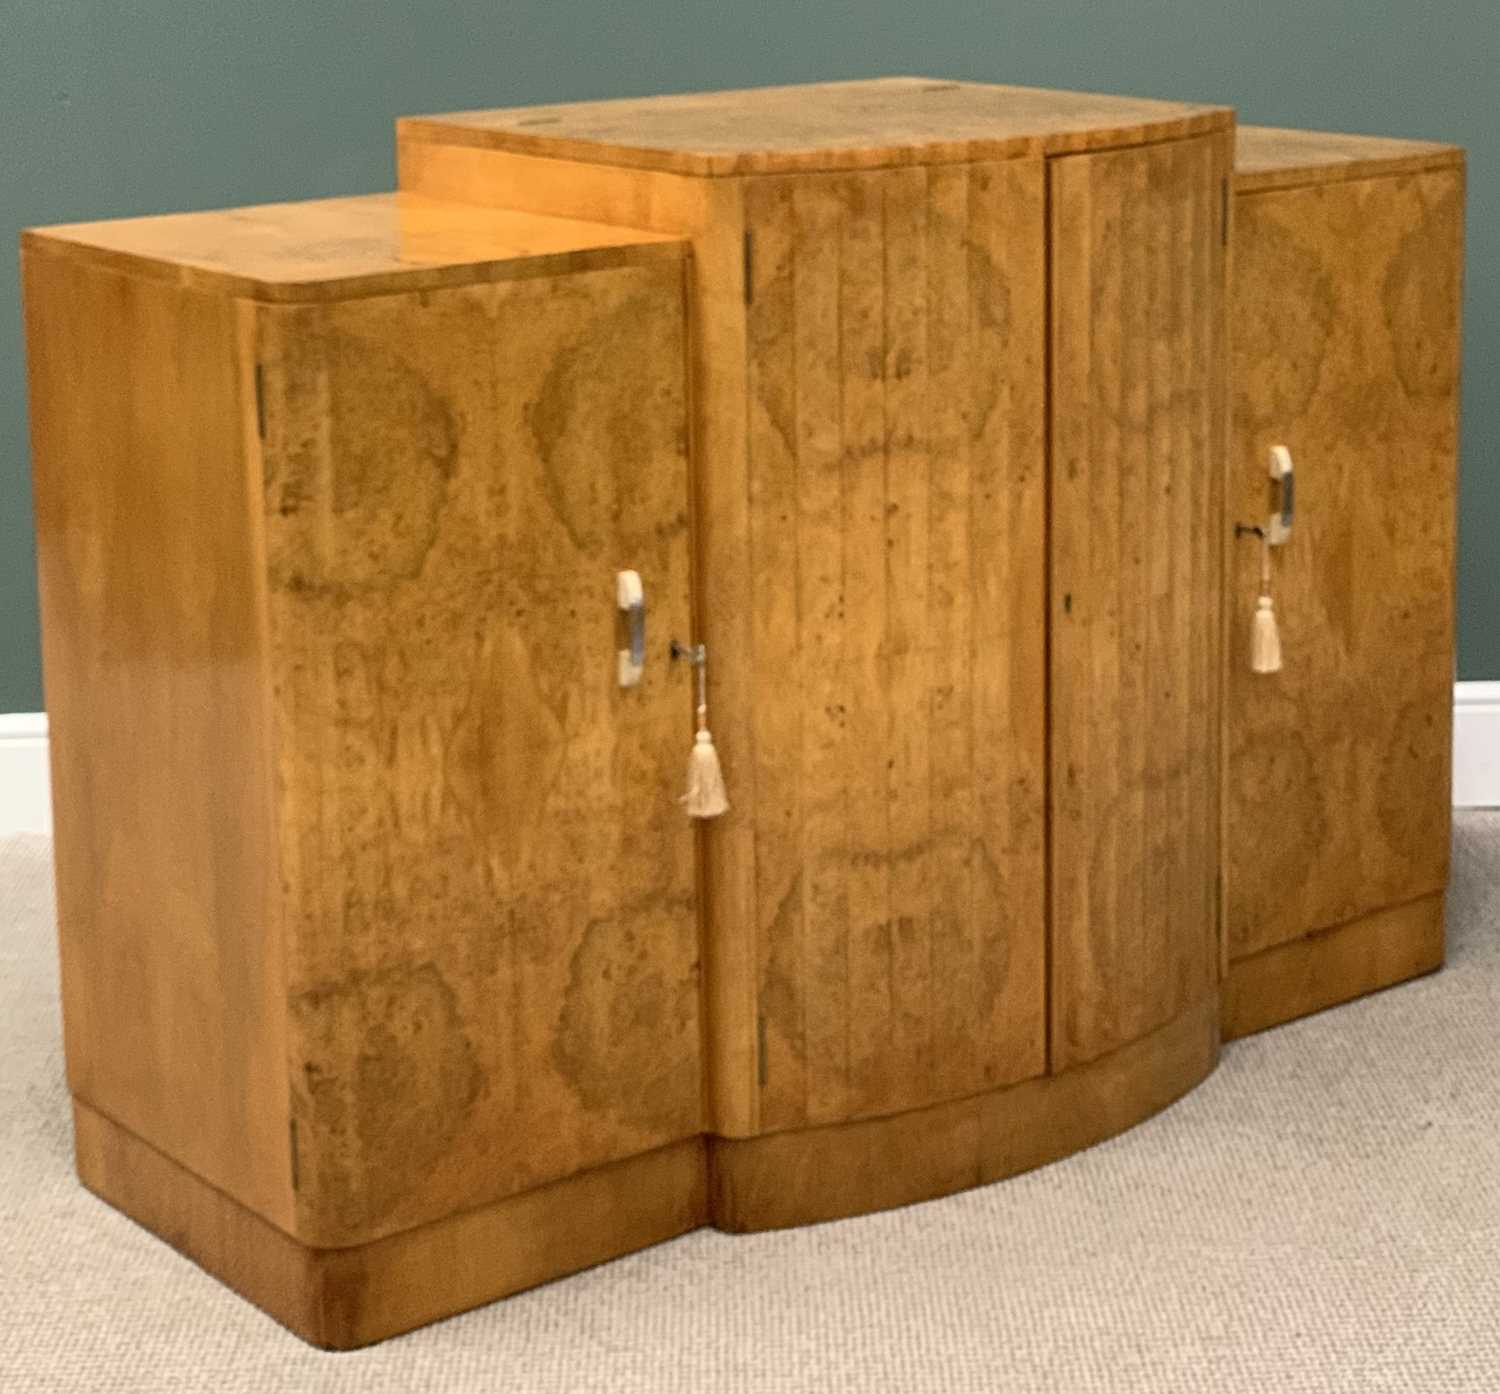 ART DECO BIRD'S EYE MAPLE VENEERED COCKTAIL CABINET SIDEBOARD, with twin fluted rib central doors - Image 6 of 8